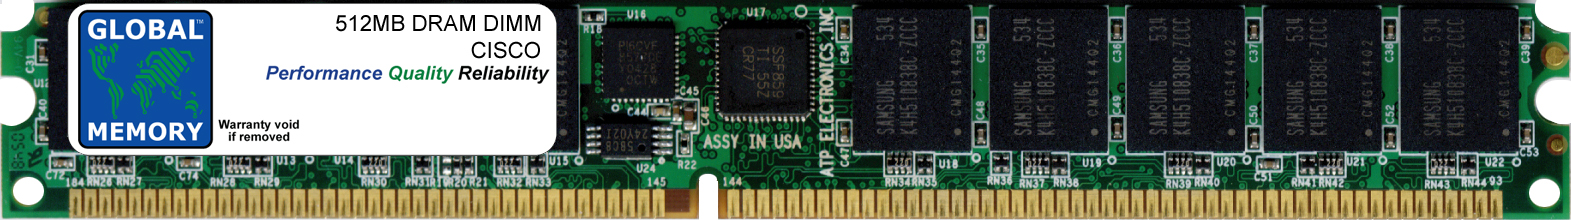 512MB DRAM DIMM MEMORY RAM FOR CISCO 3925 / 3945 ROUTERS (MEM-3900-512MB) - Click Image to Close